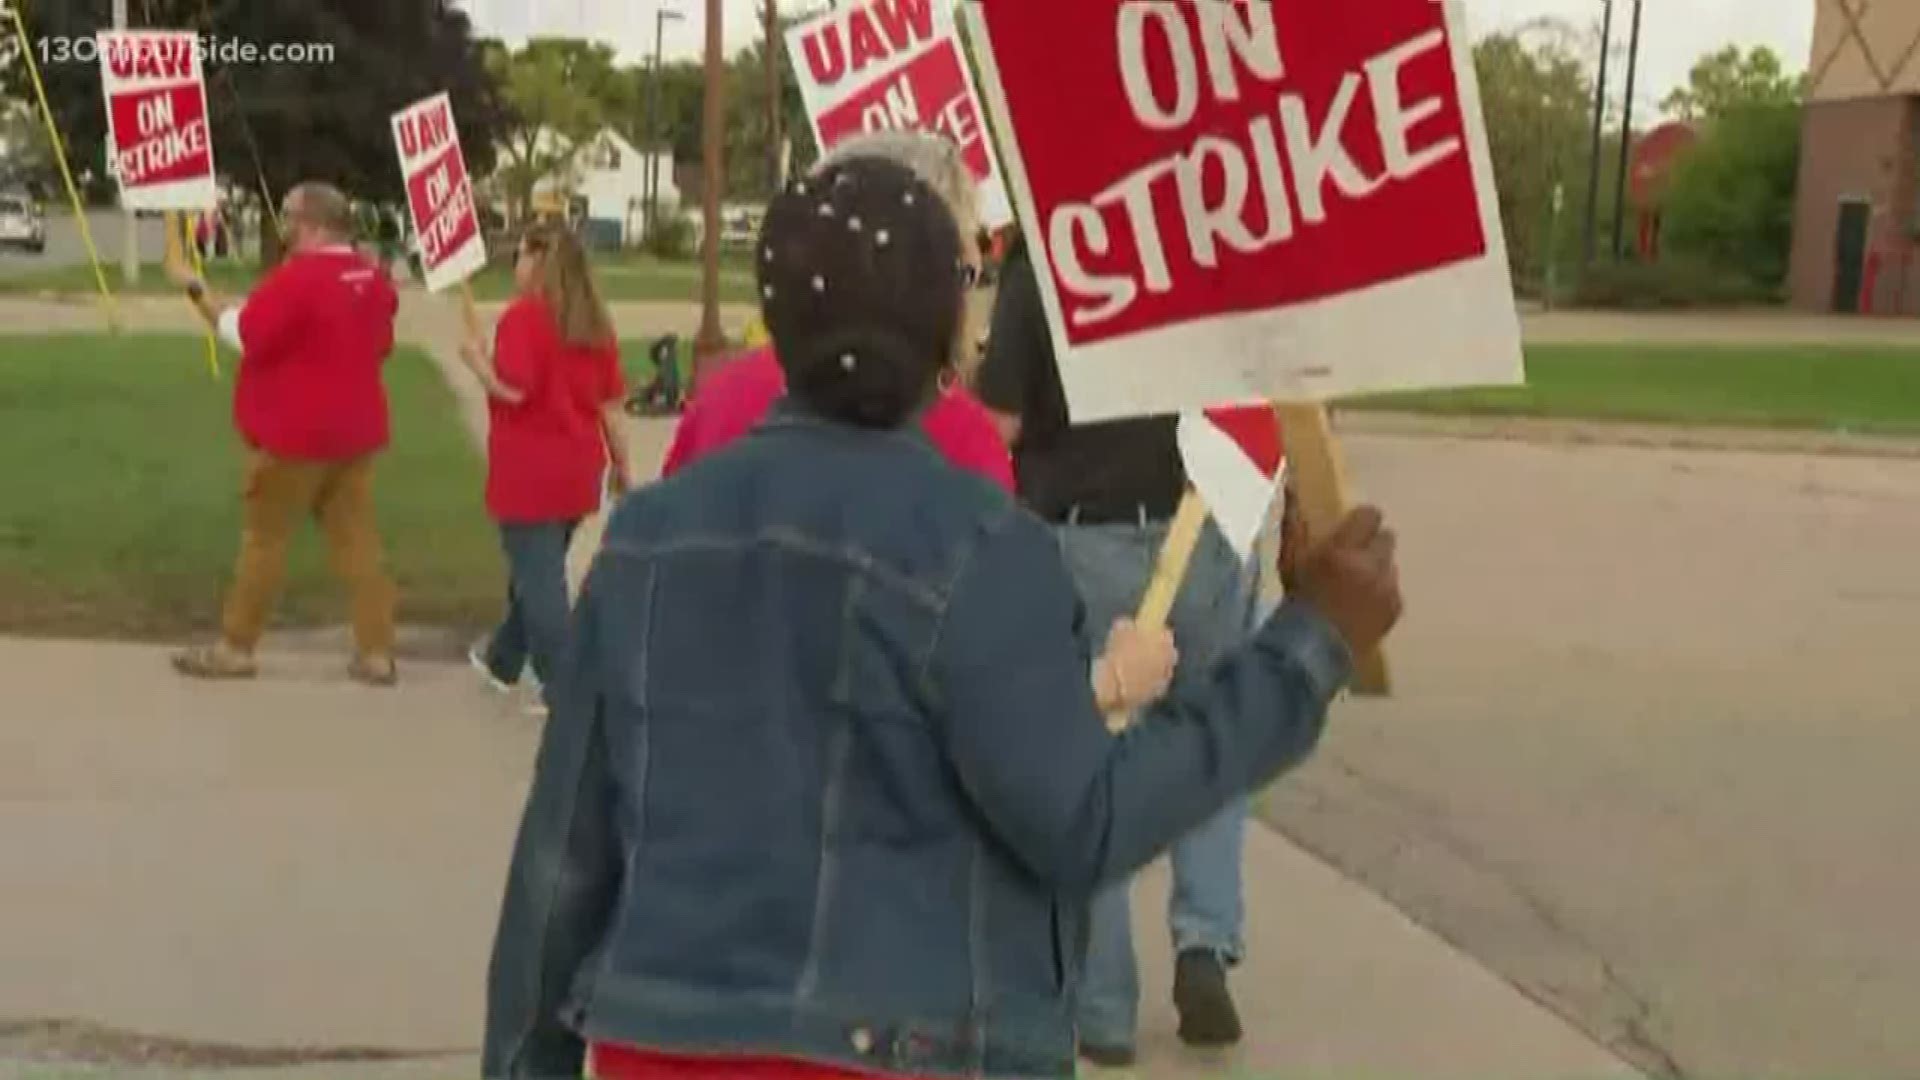 UAW members on strike have received support from a number of people, but that included teachers from all over the state who joined picket lines Monday.